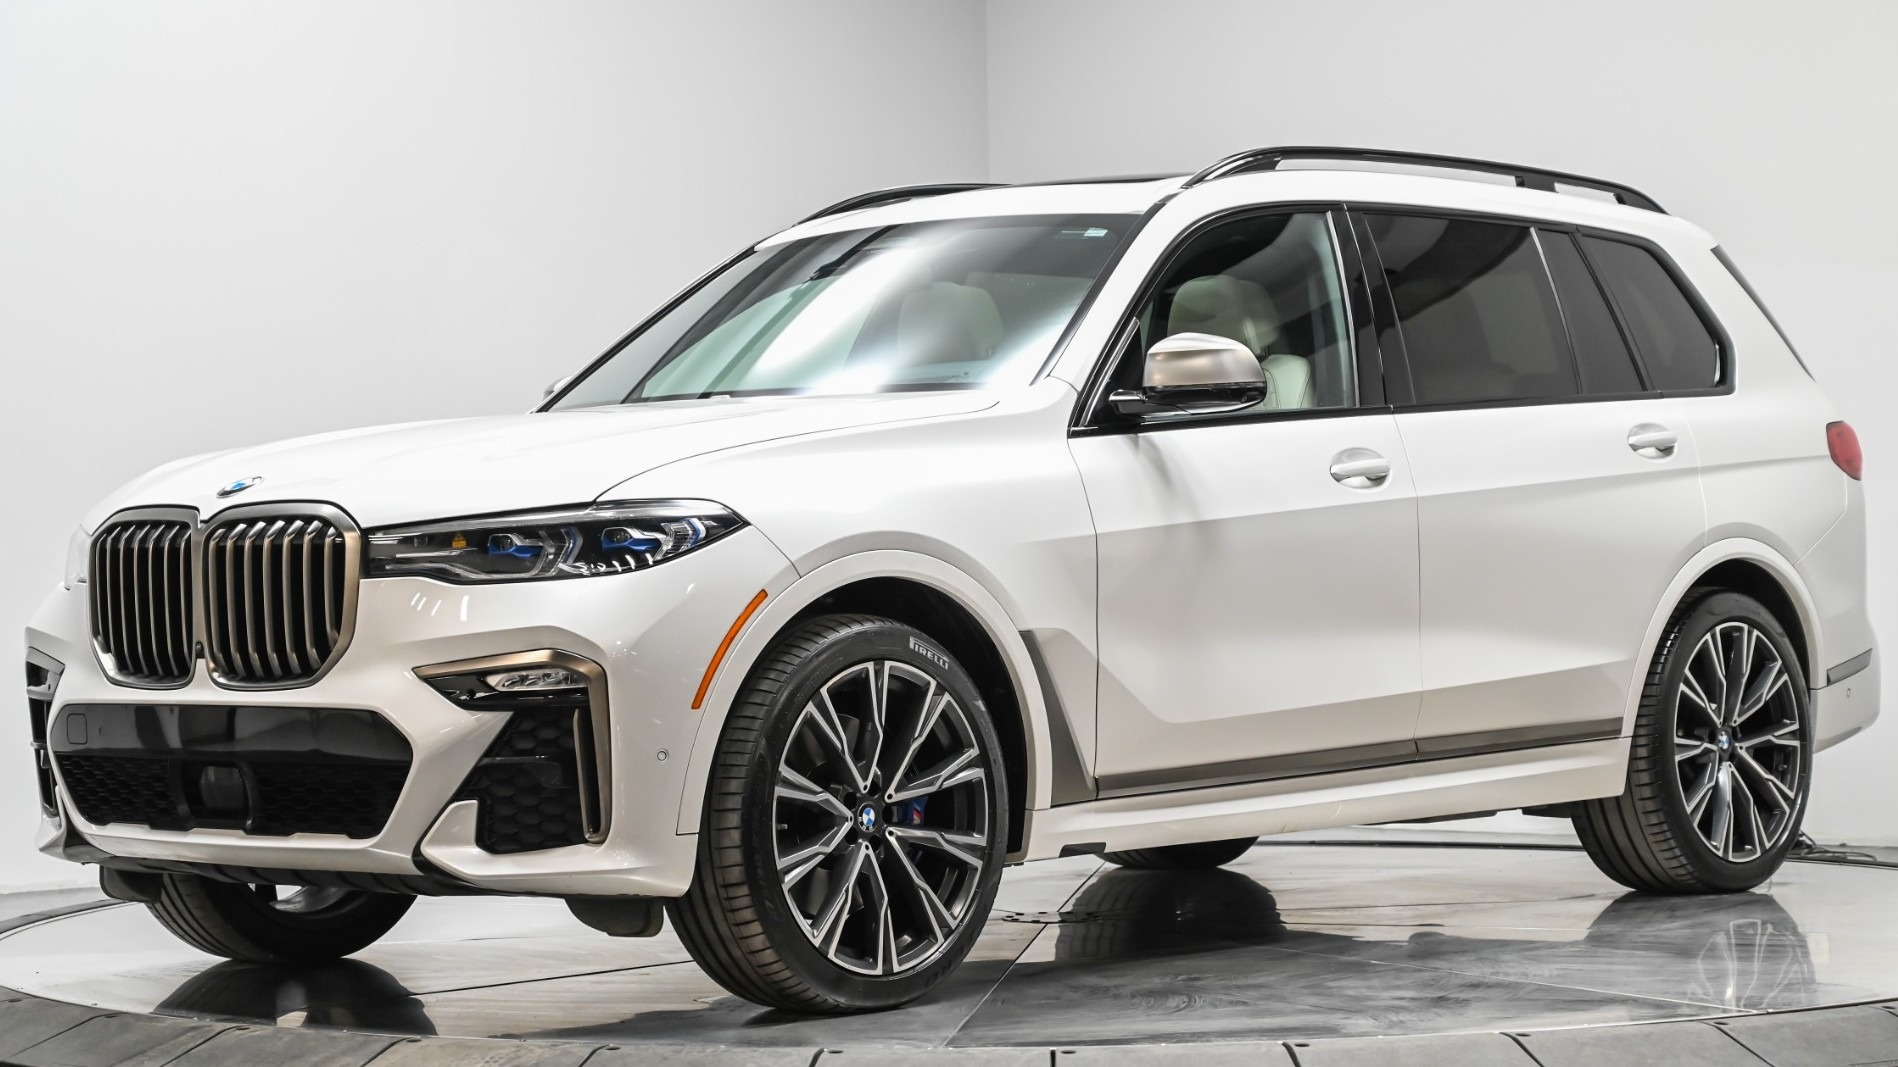 Akron Pre-Owned Car Dealer Offers 2021 BMW X7 & 2018 Land Rover Autobiography